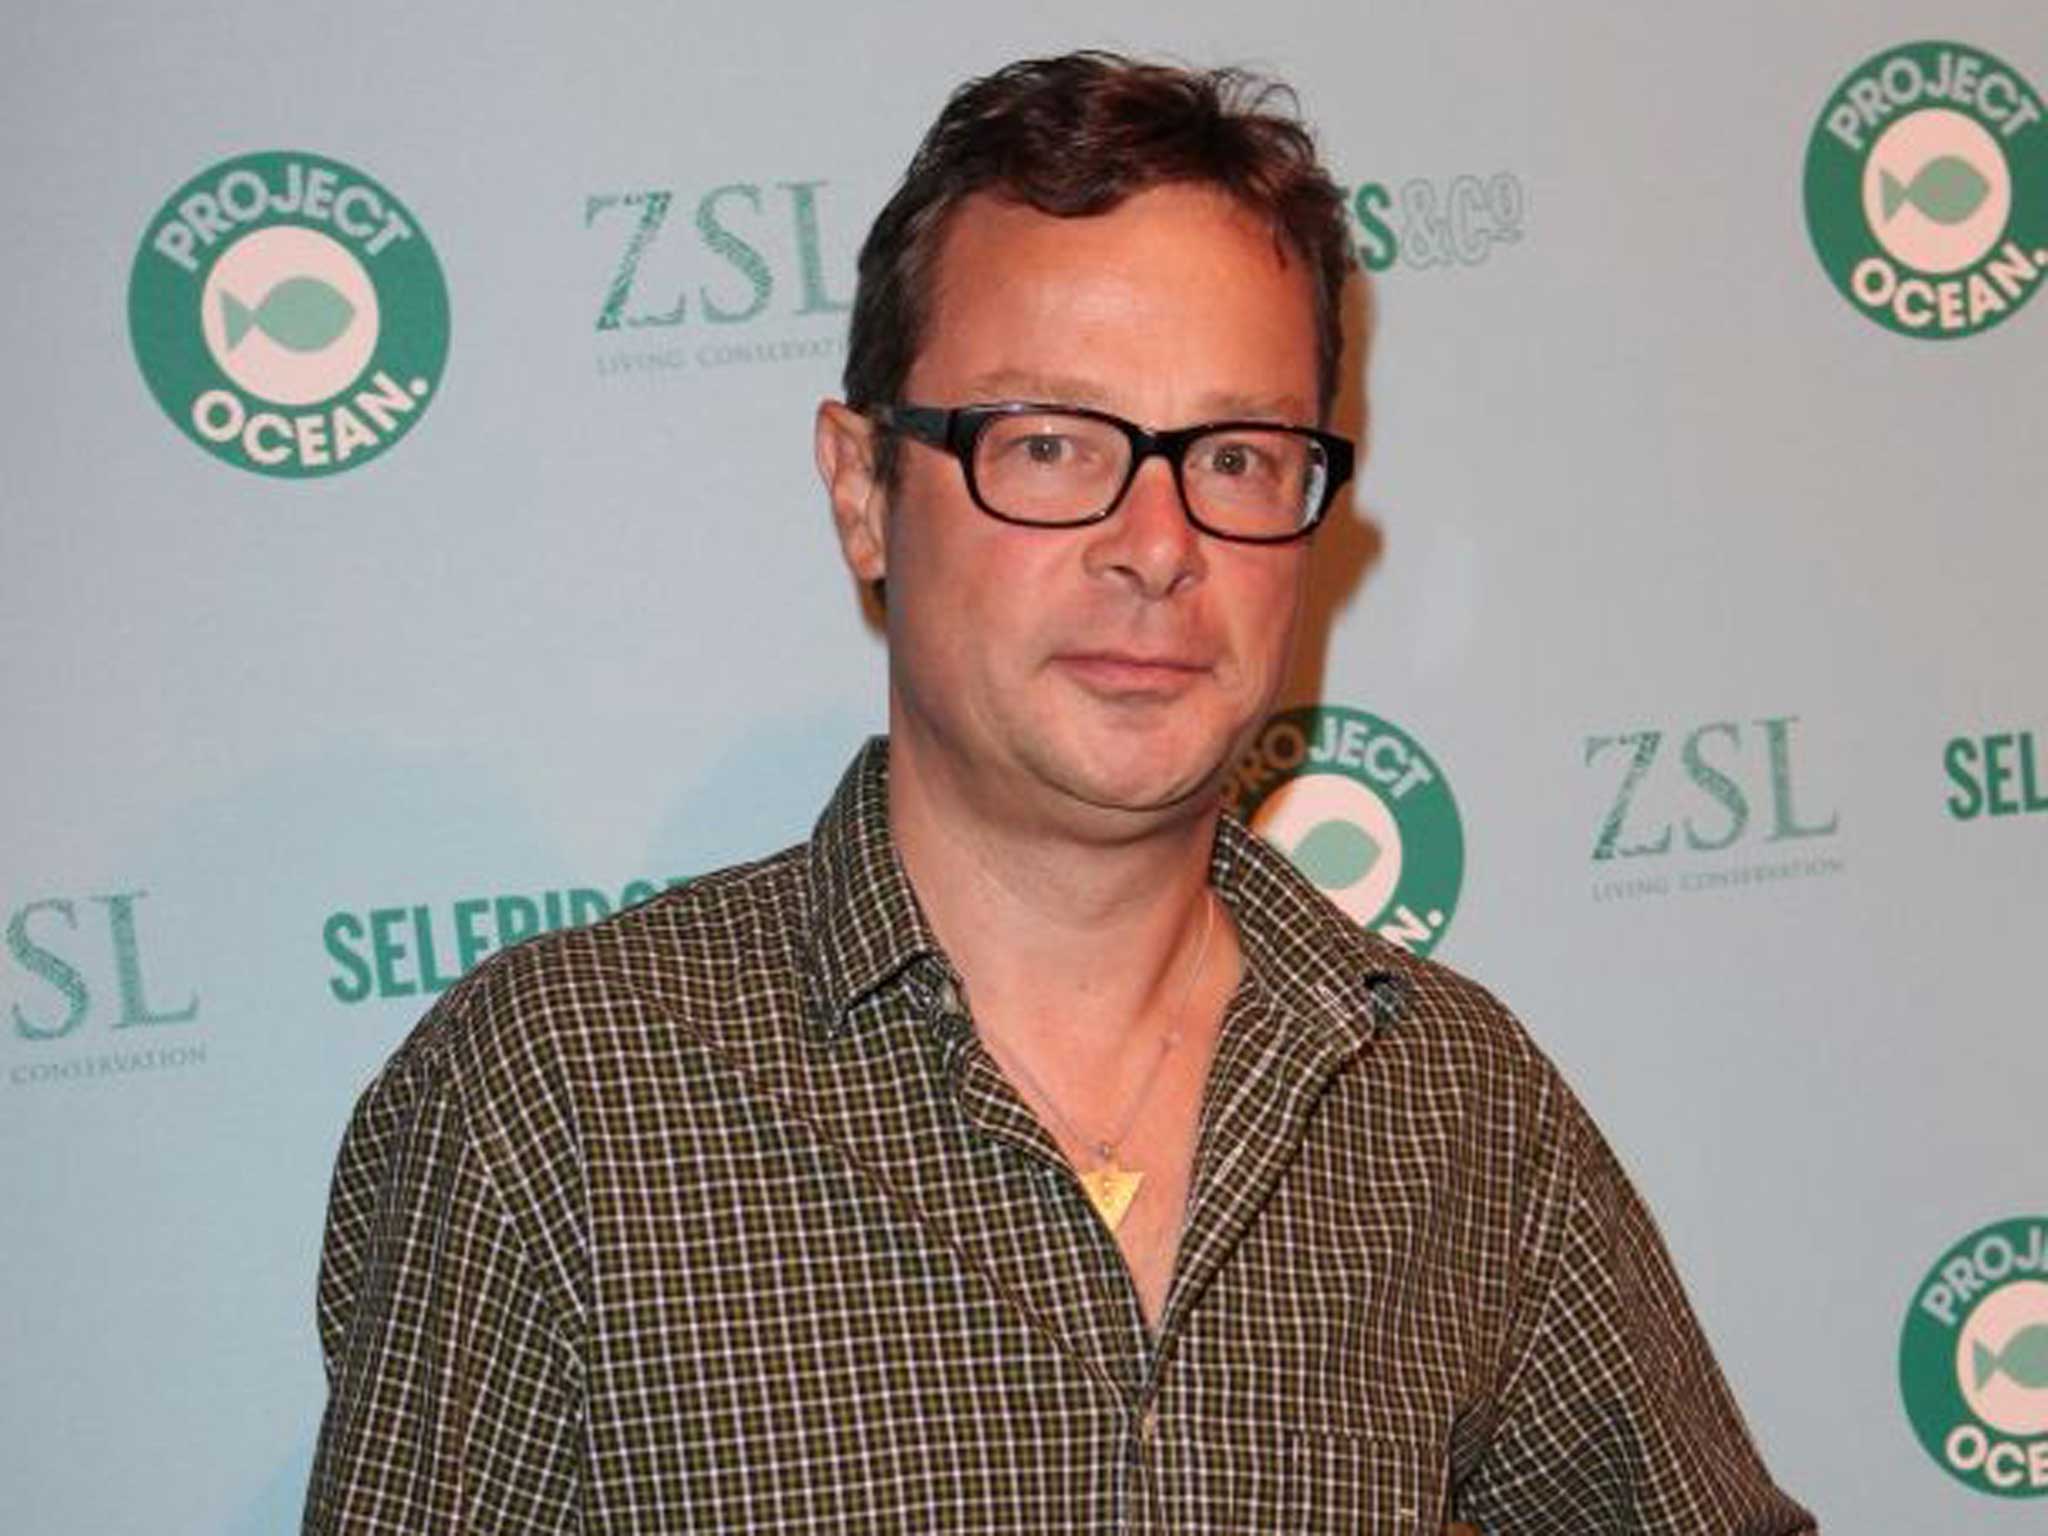 Hugh Fearnley-Whittingstall has applauded the pledges, describing them as a “strong commitment to marine conservation”